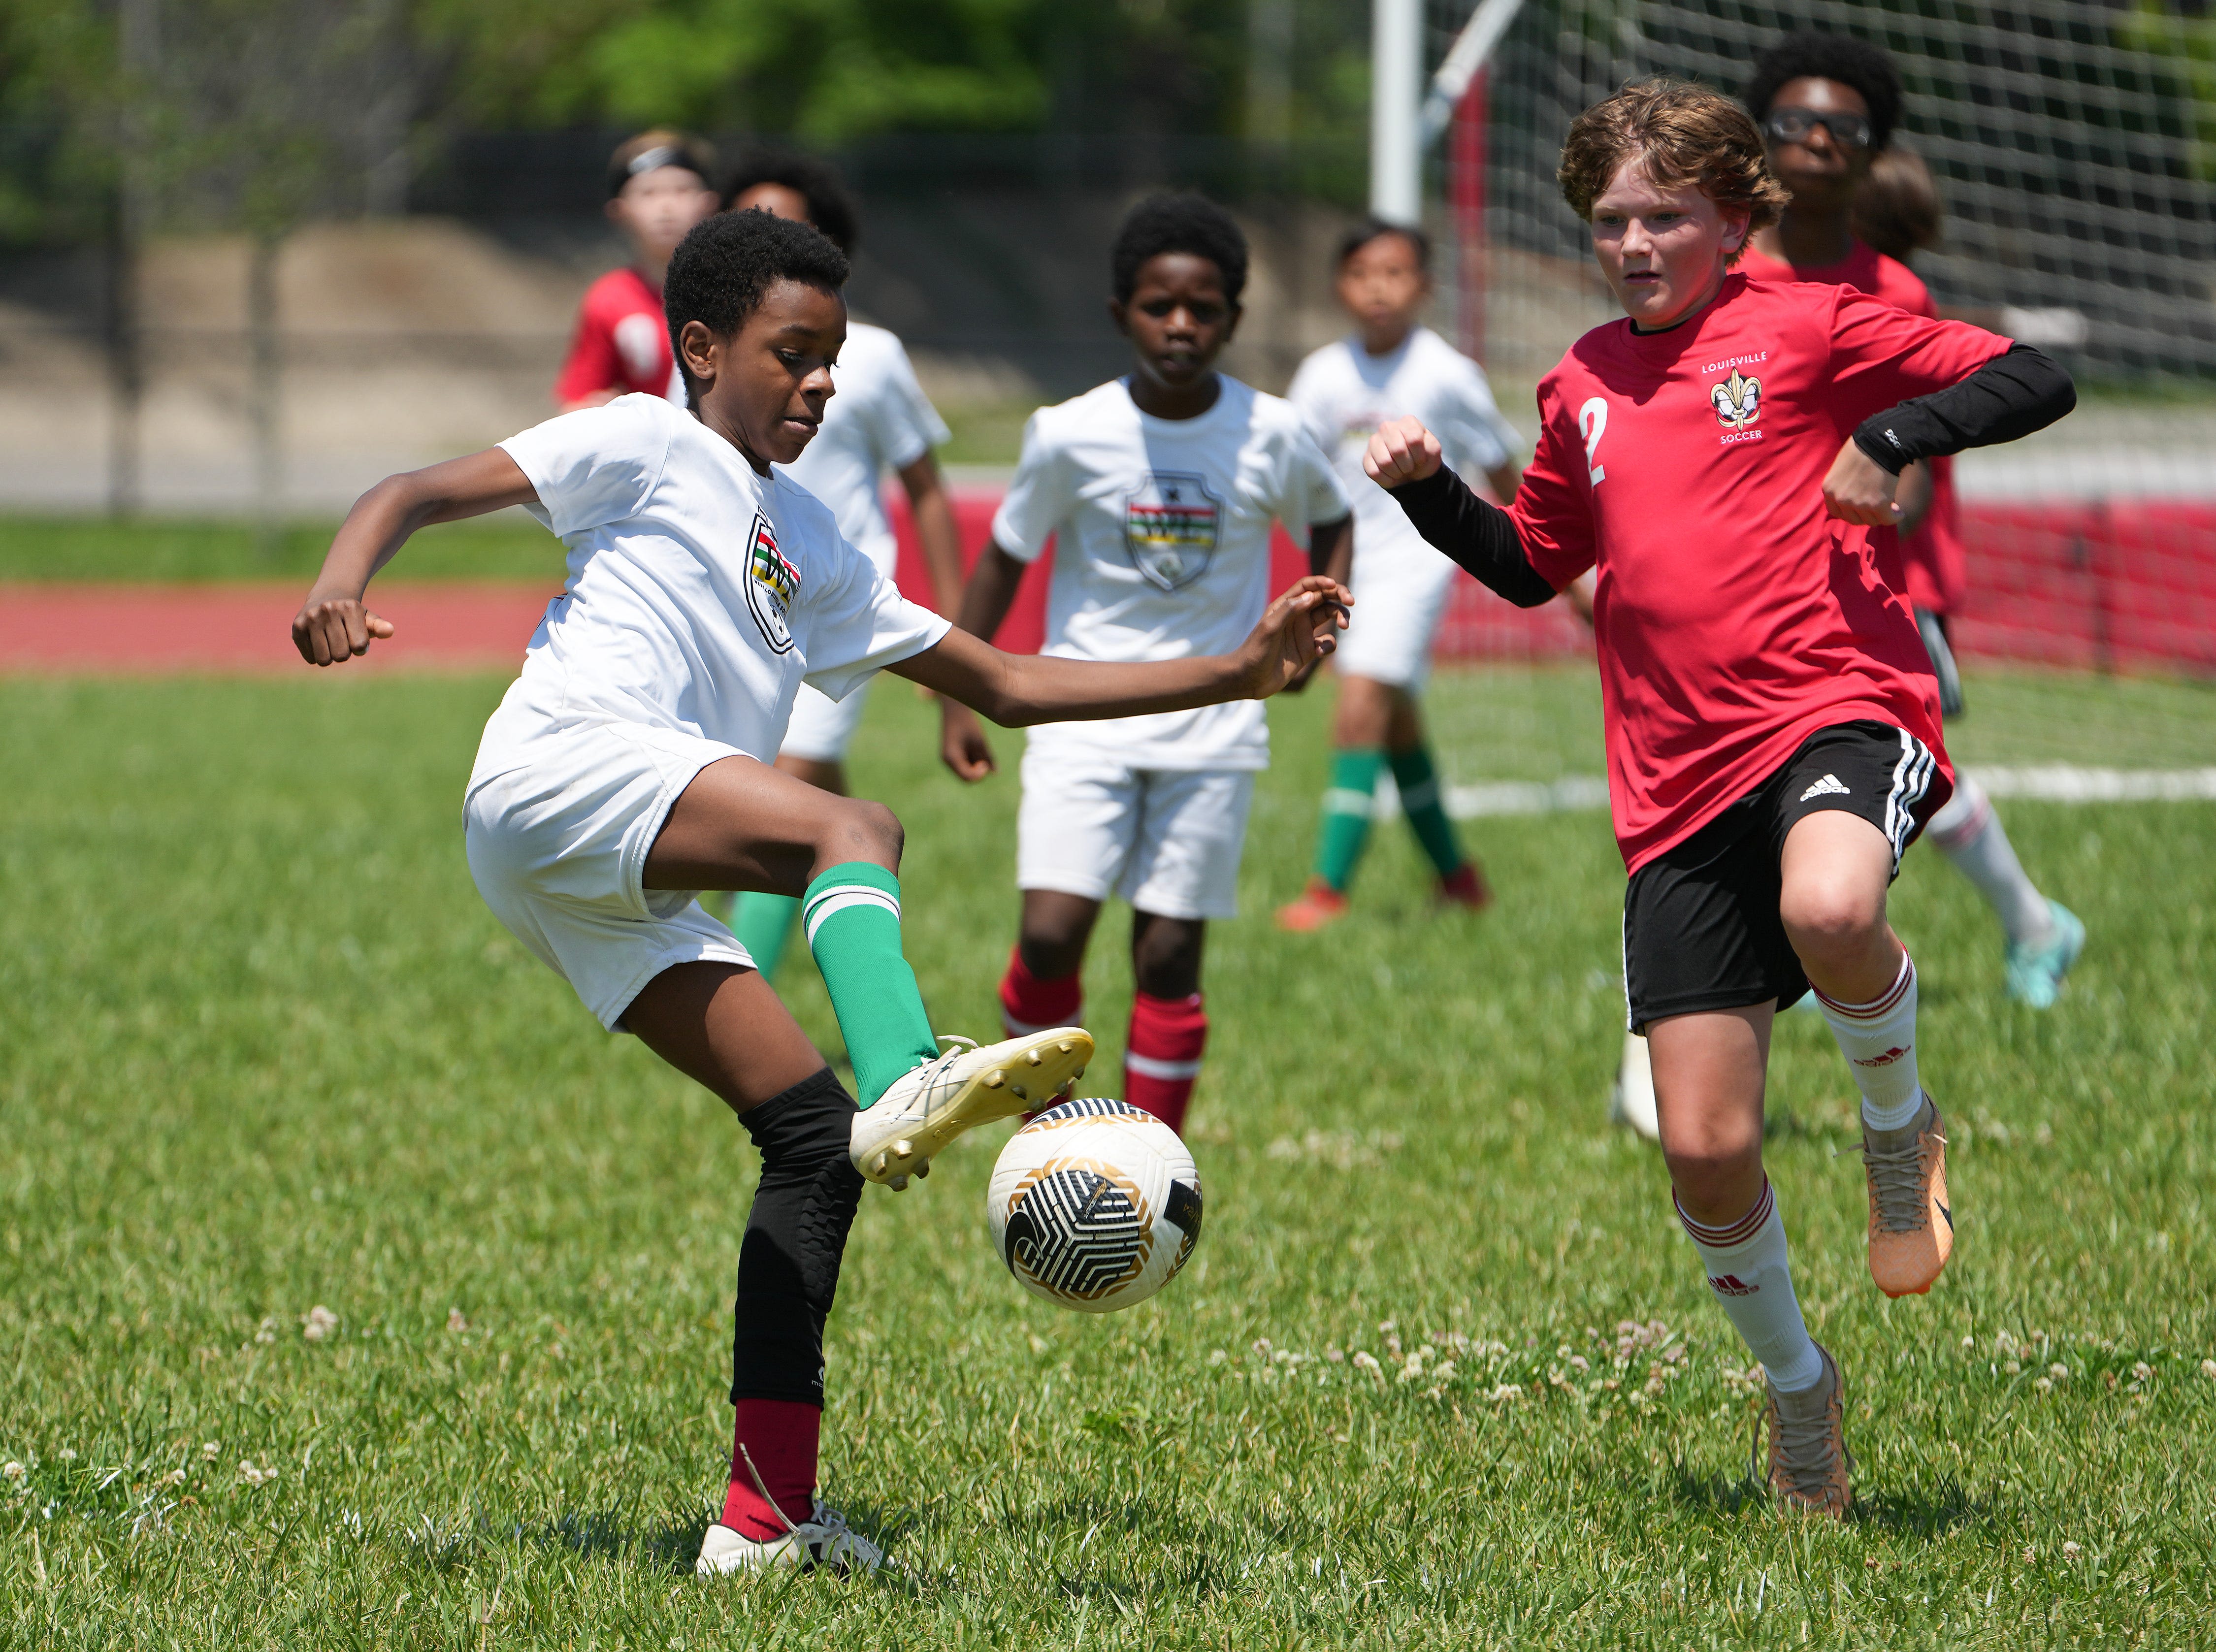 West Louisville Soccer's goal is to bring the beautiful game west of Ninth Street